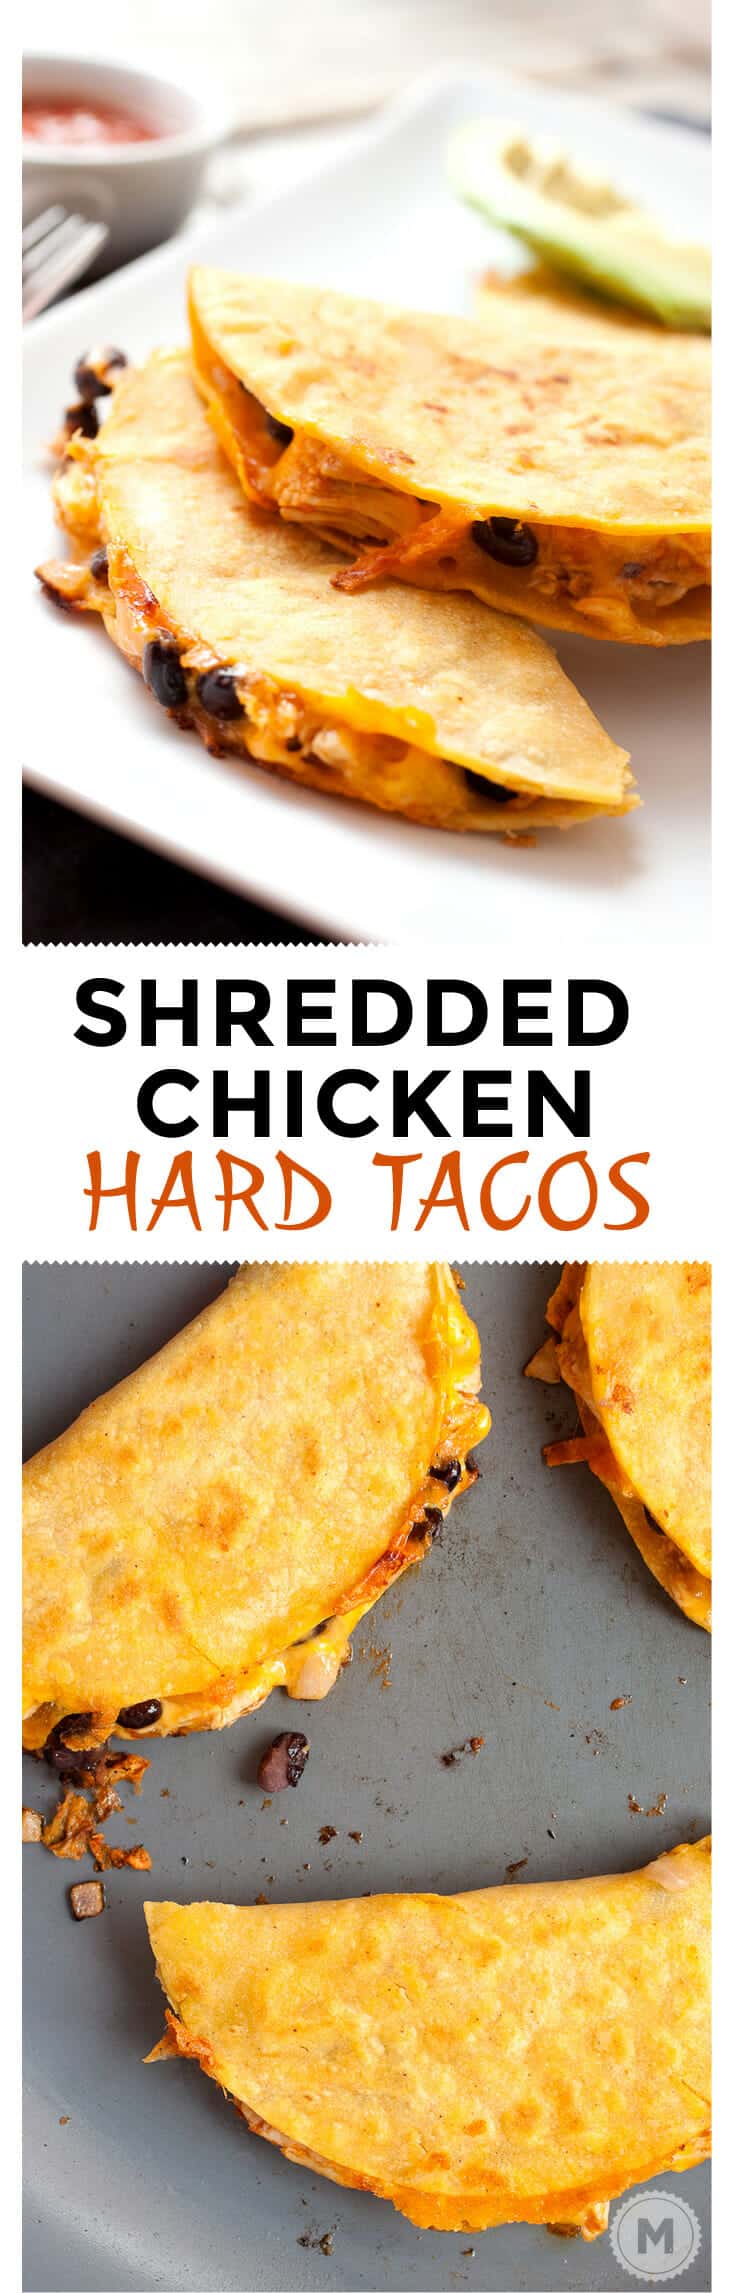 Shredded Chicken Hard Tacos! These crispy and cheesy tacos are half quesadilla and half hard taco. The filling is easy to make and you can use almost anything in the fridge! Once you try them you'll never go back to regular tacos! | www.macheesmo.com